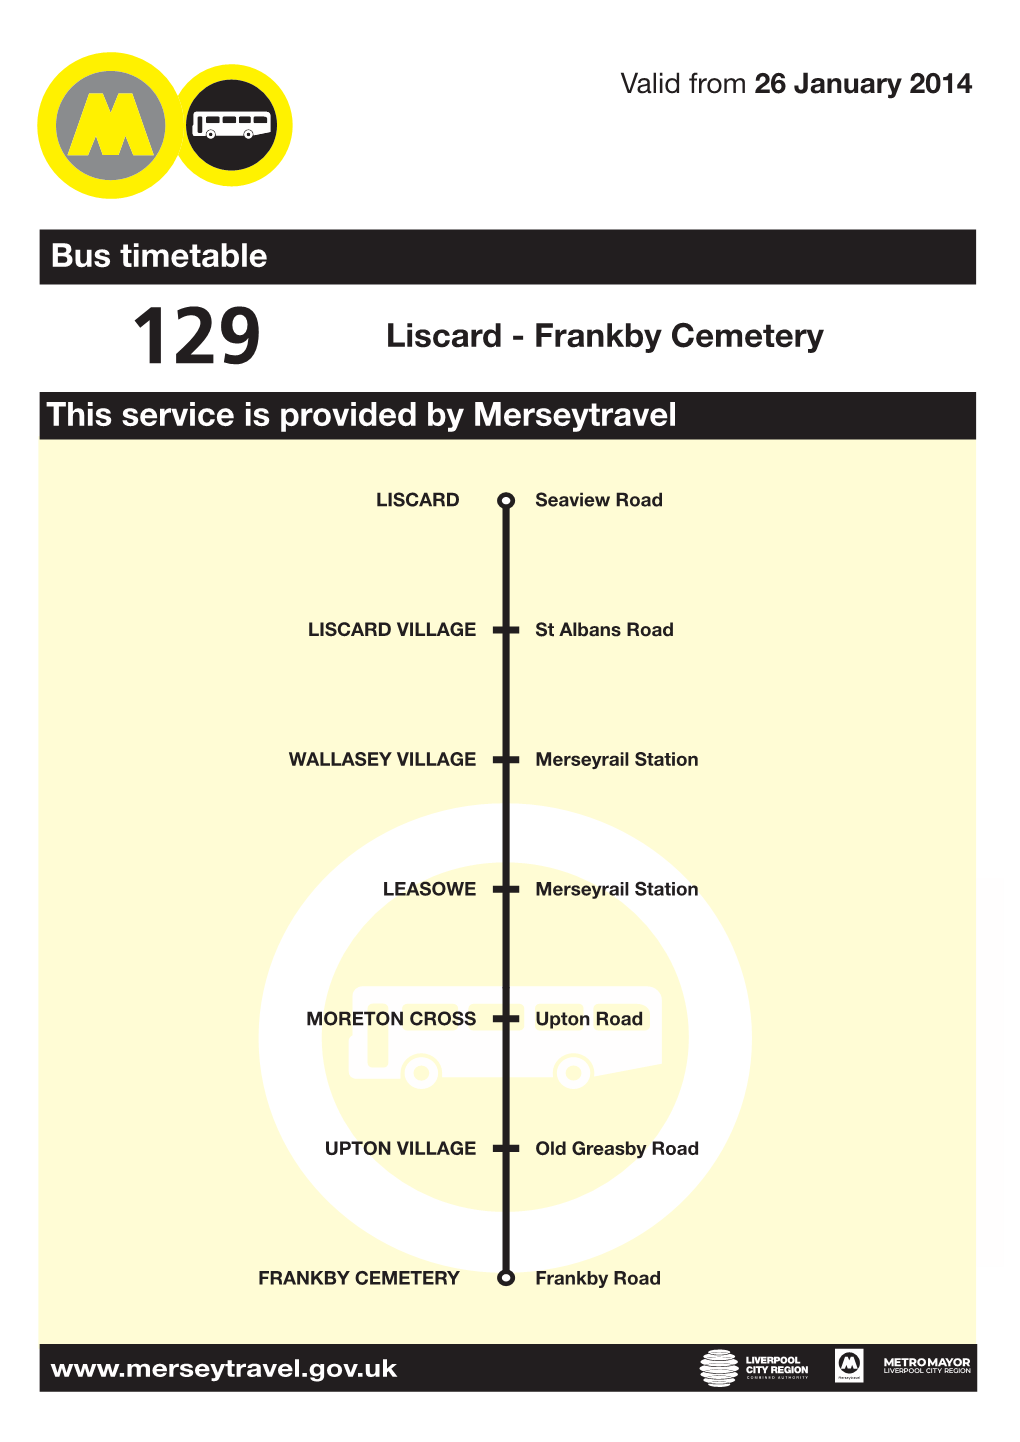 Bus Timetable This Service Is Provided by Merseytravel